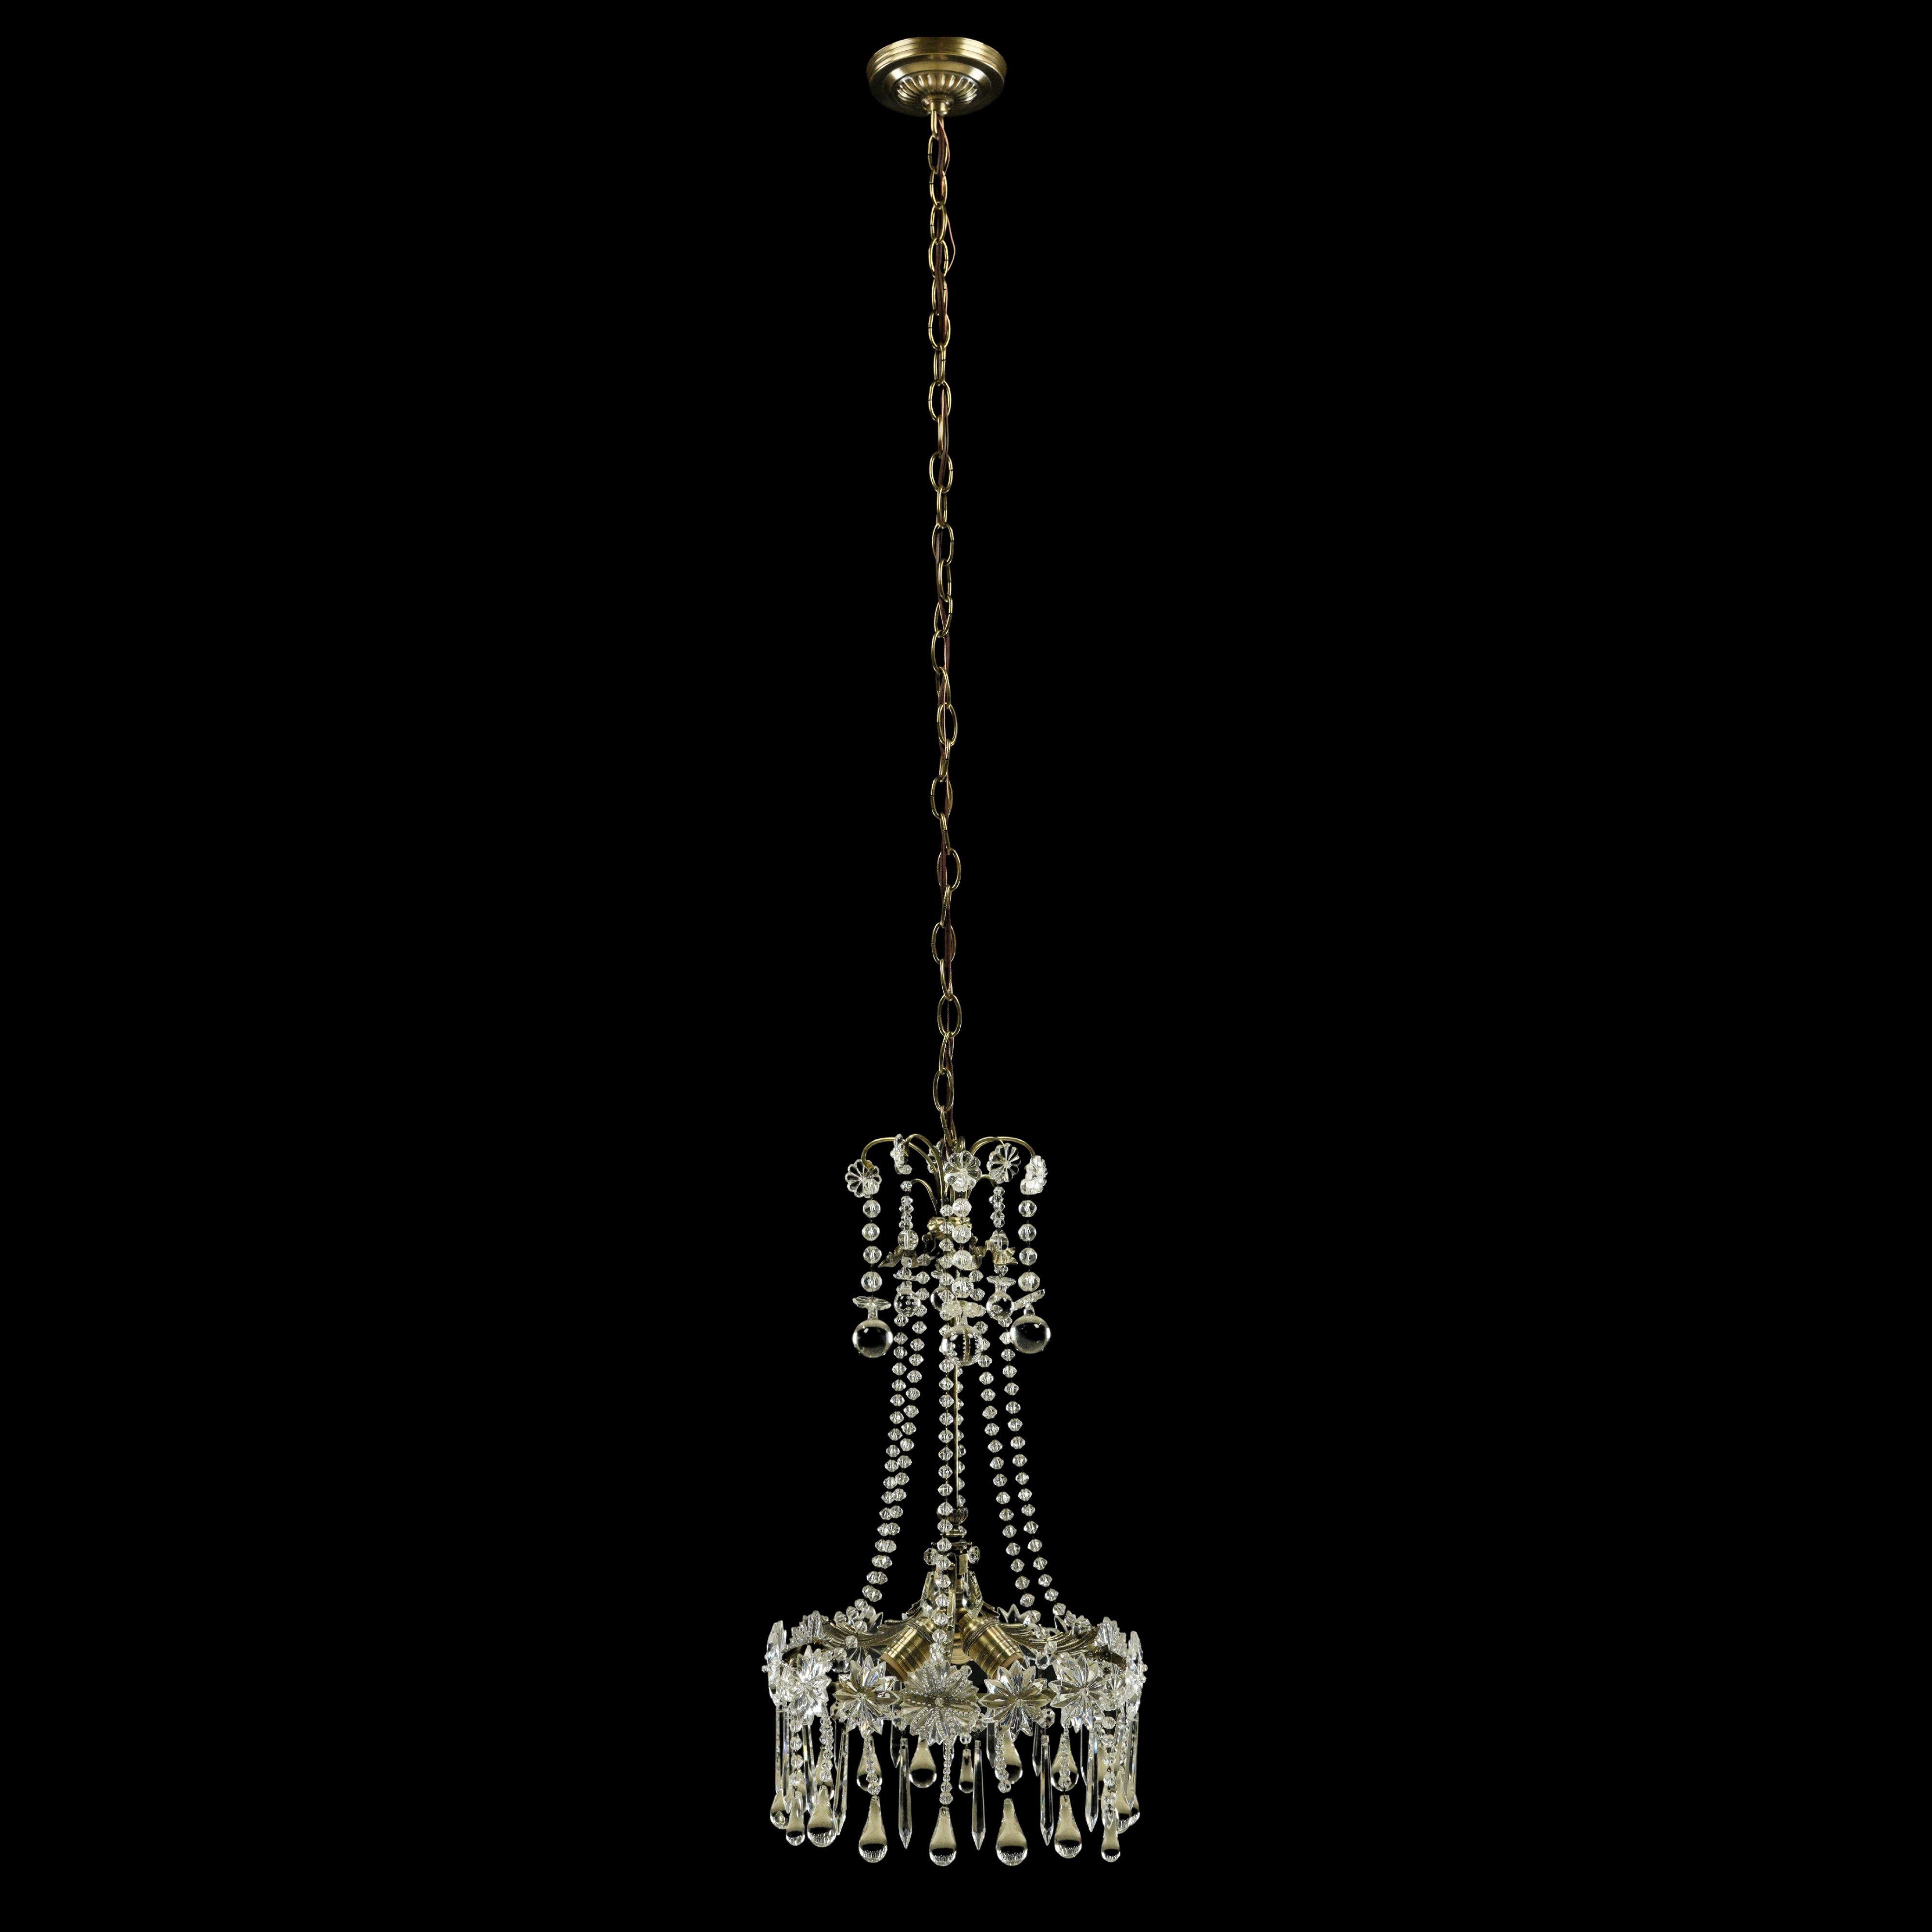 Restored clear floral crystal chandelier with ornate brass hardware. Takes three standard medium base light bulbs. Cleaned and restored. One available. Please note, this item is located in one of our NYC locations.